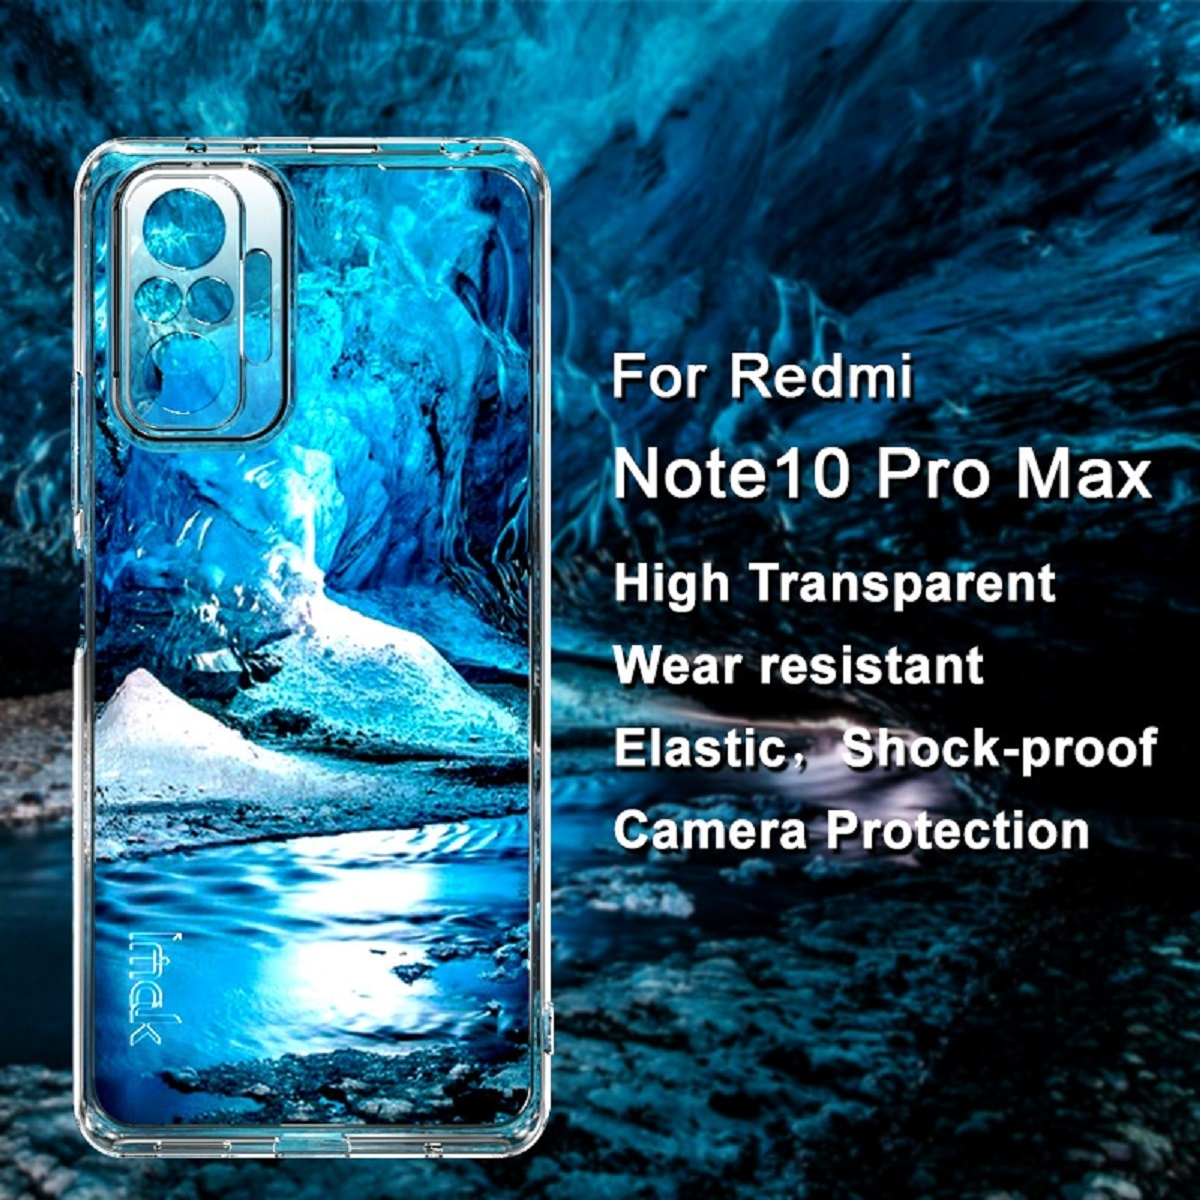 Hülle, Redmi Pro, Xiaomi, PROTECTORKING Backcover, 10 Backcover, Transparent Note